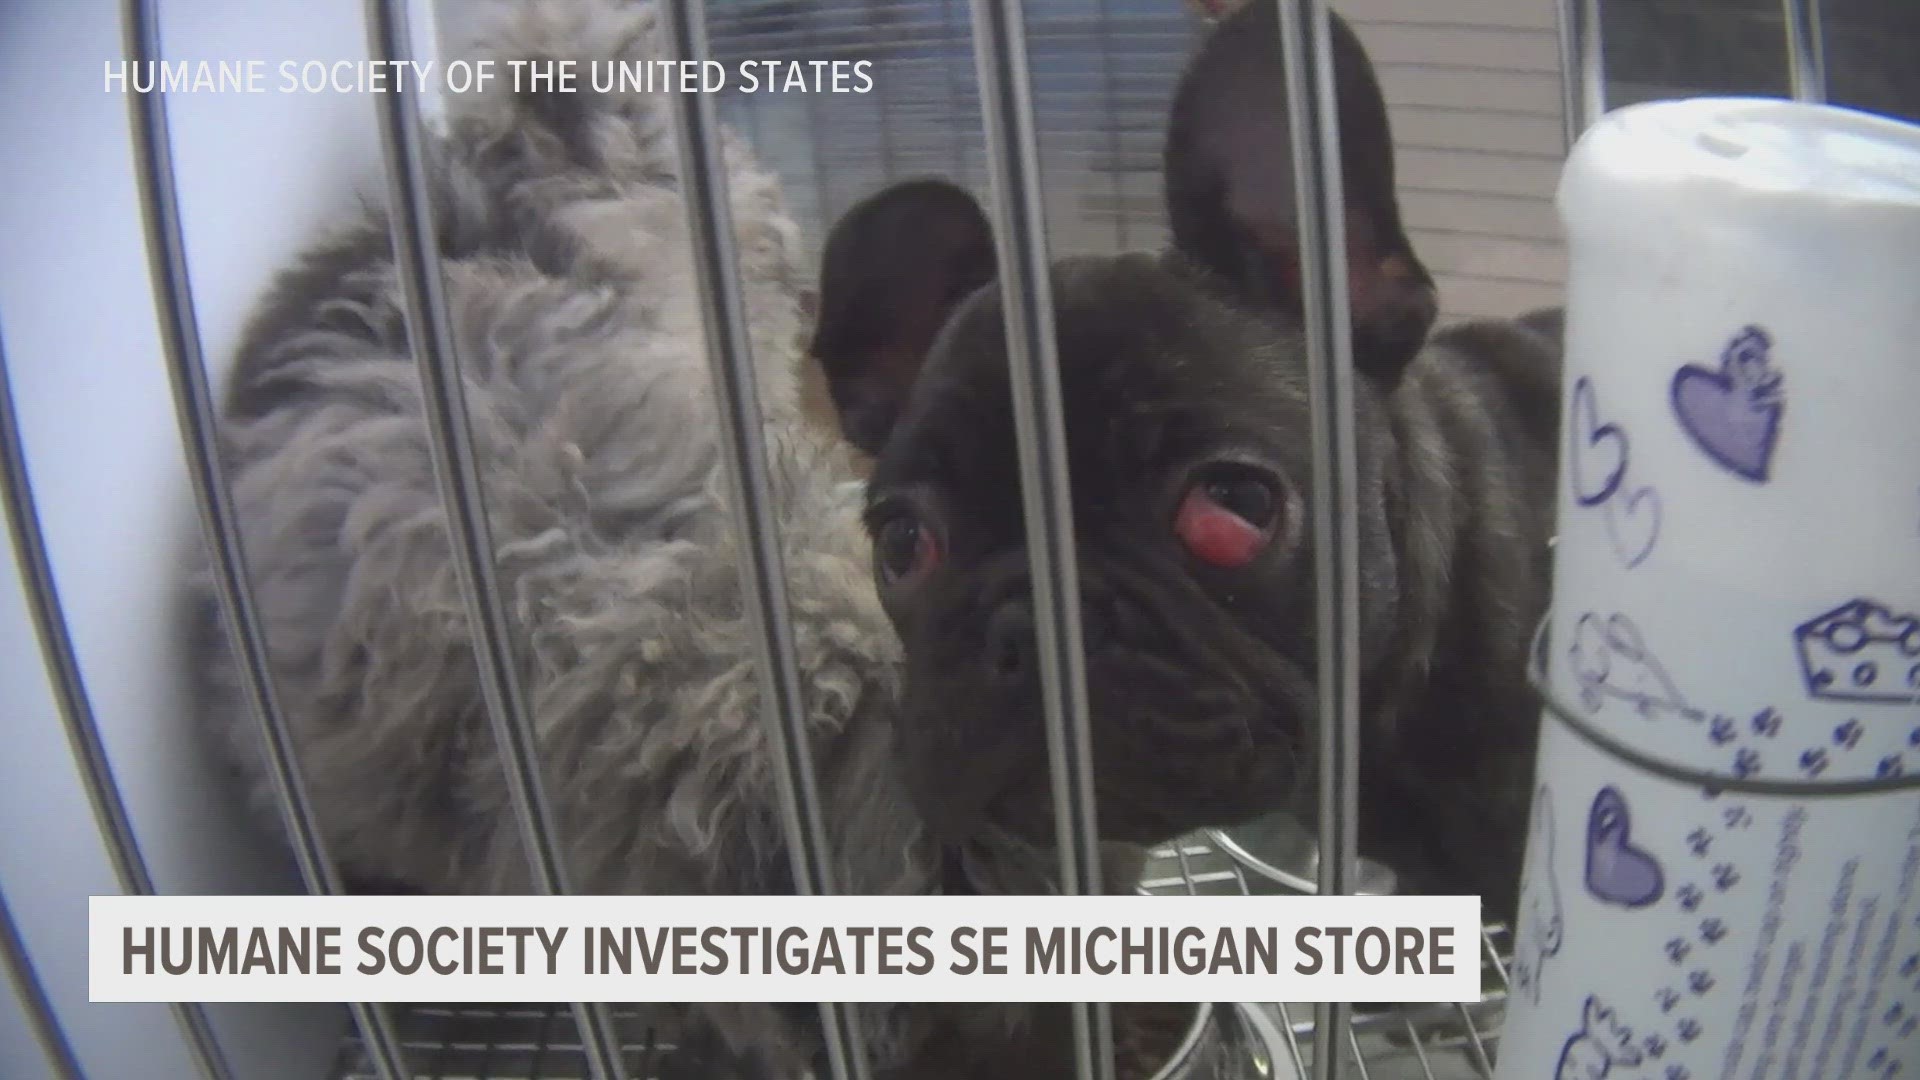 During the Humane Society's time working undercover they documented improper care, sick puppies and dangerous conditions using a hidden camera.